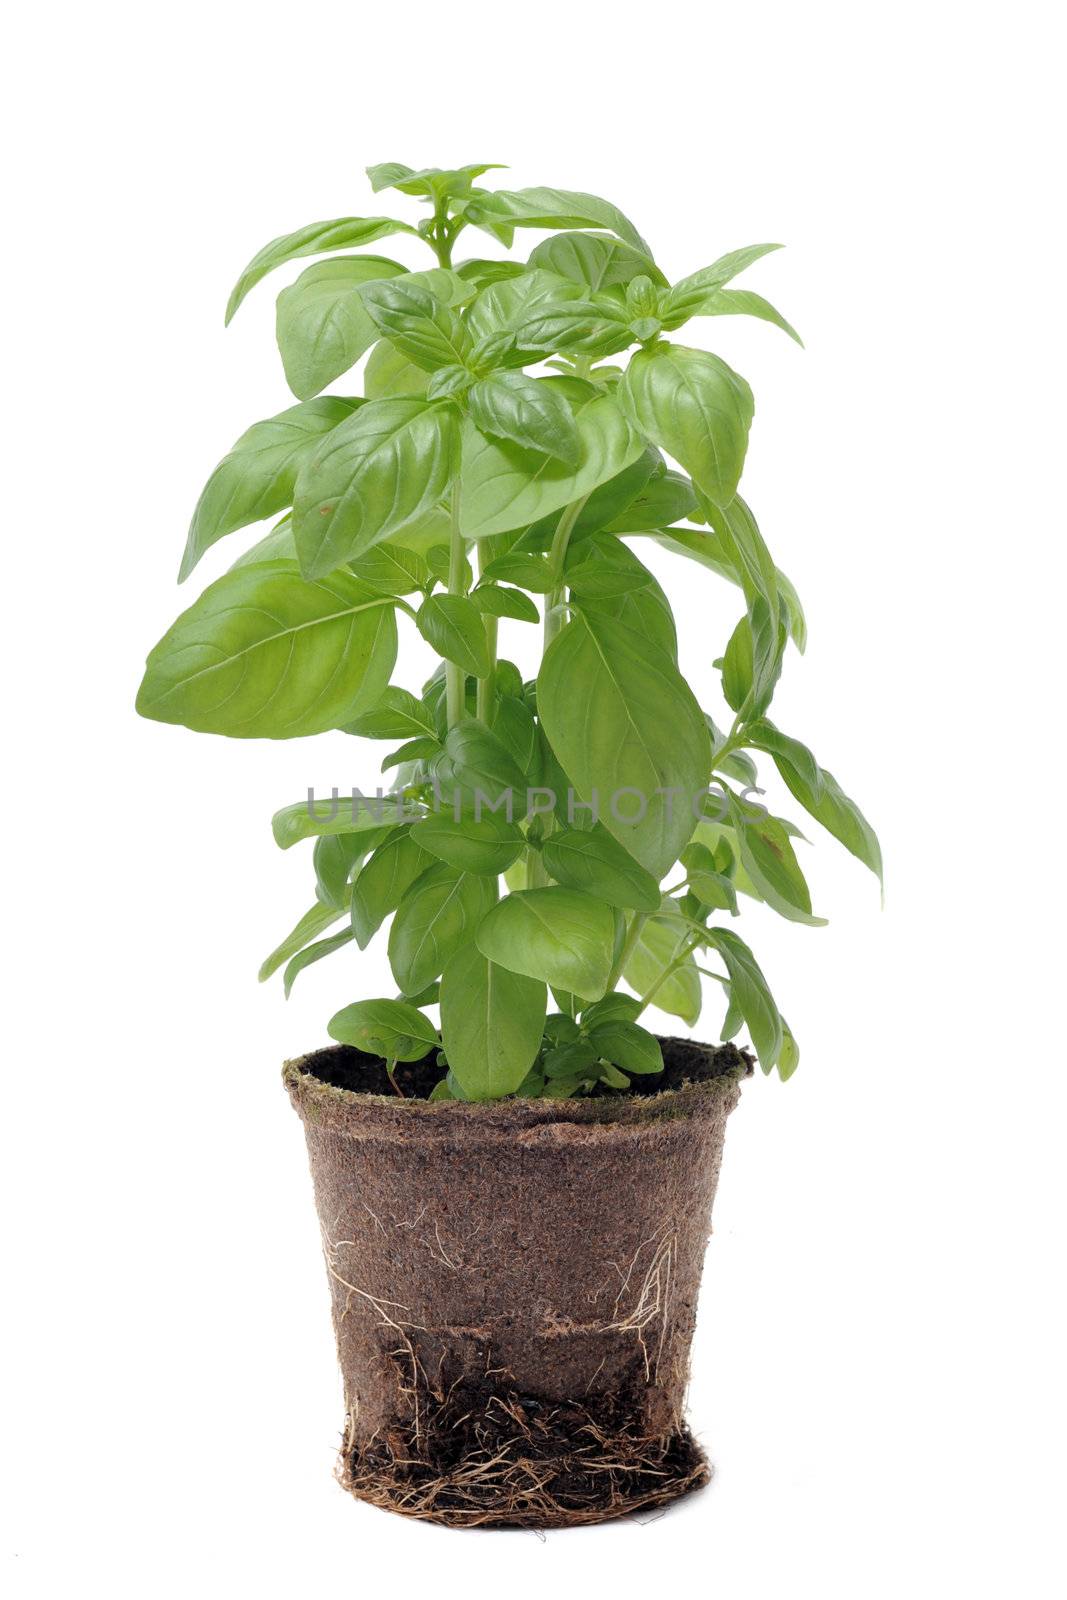 basil in pot isolated by cynoclub